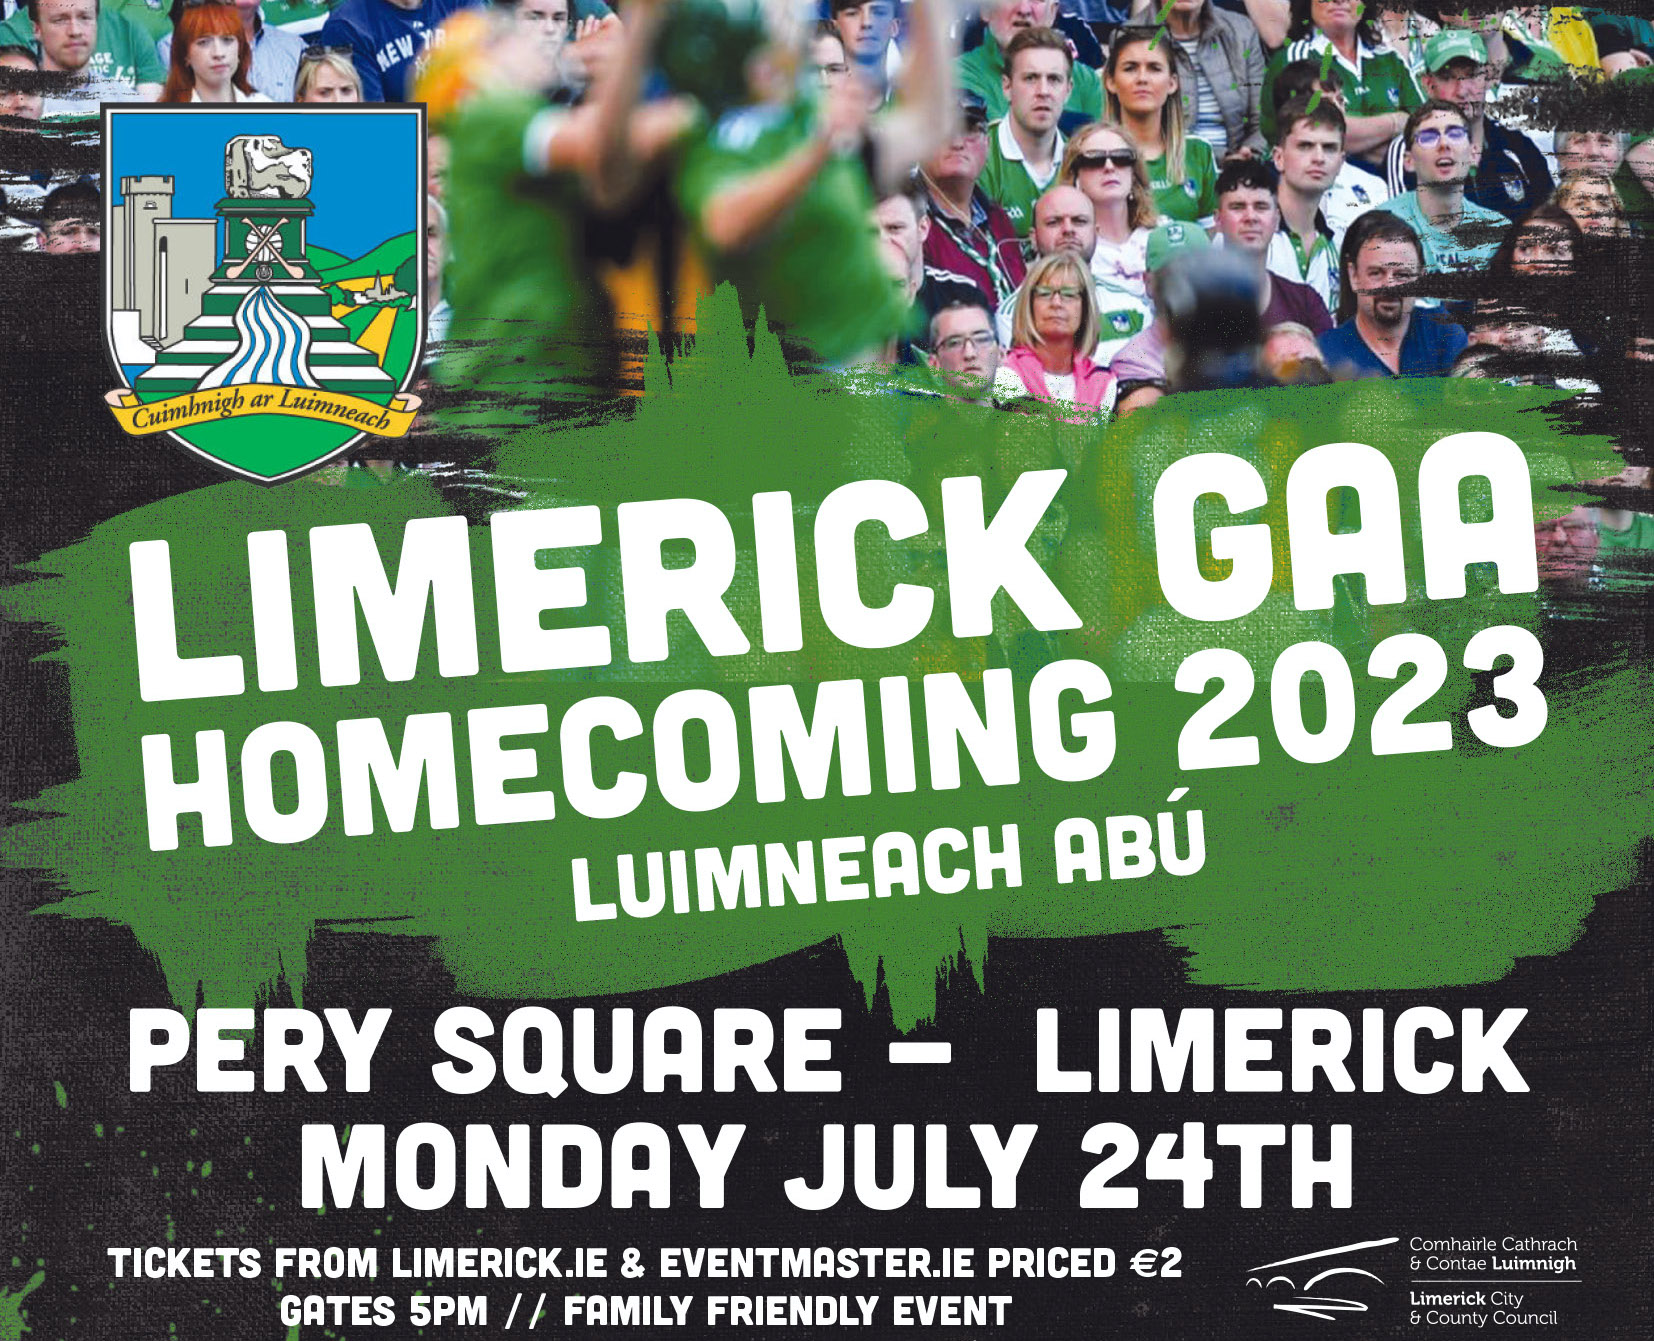 Four in a row All Ireland Hurling champions to receive Limerick city Homecoming celebration